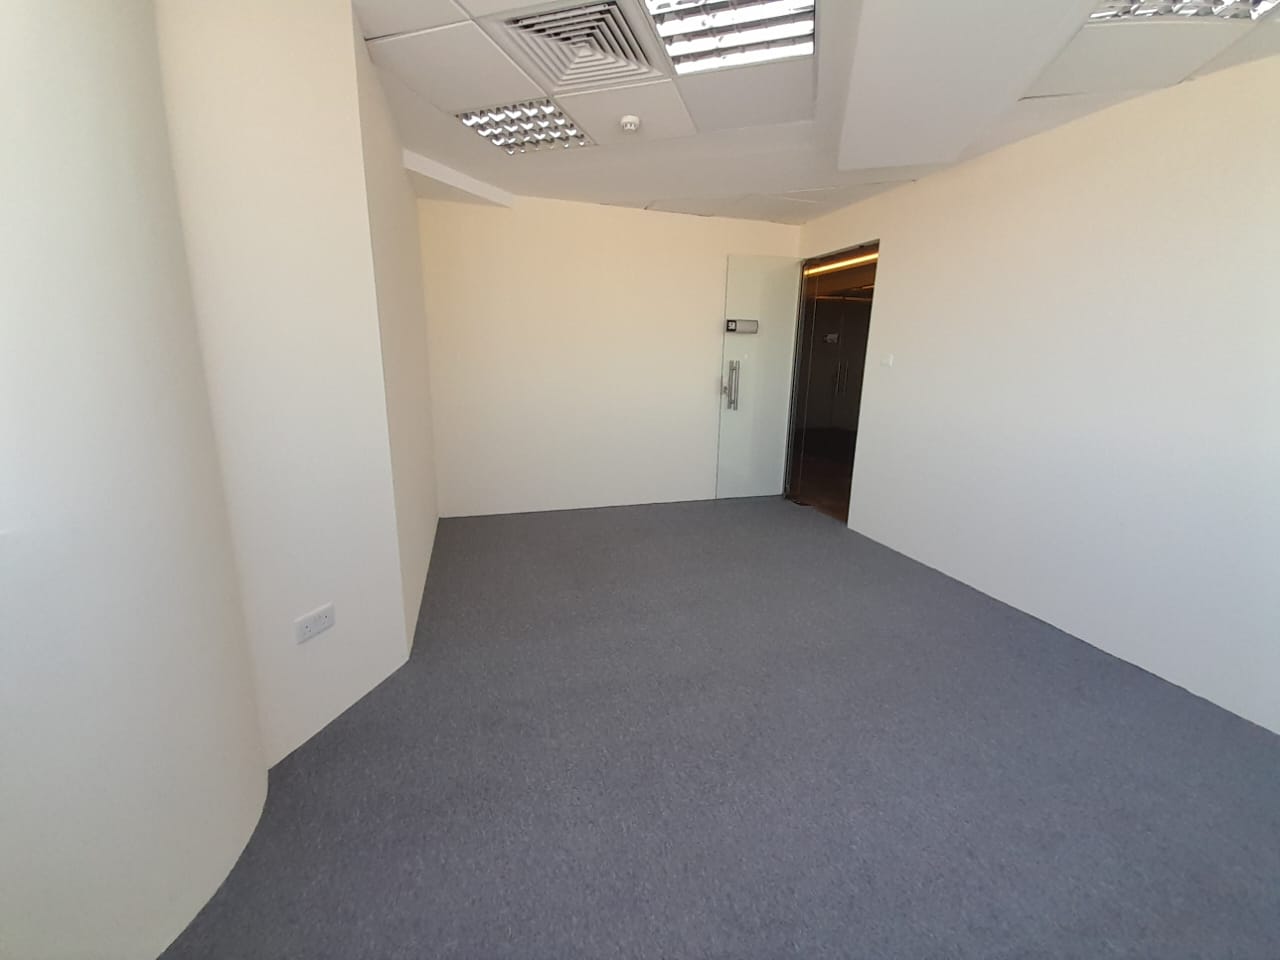 Elegant and Spacious Office Space for Lease